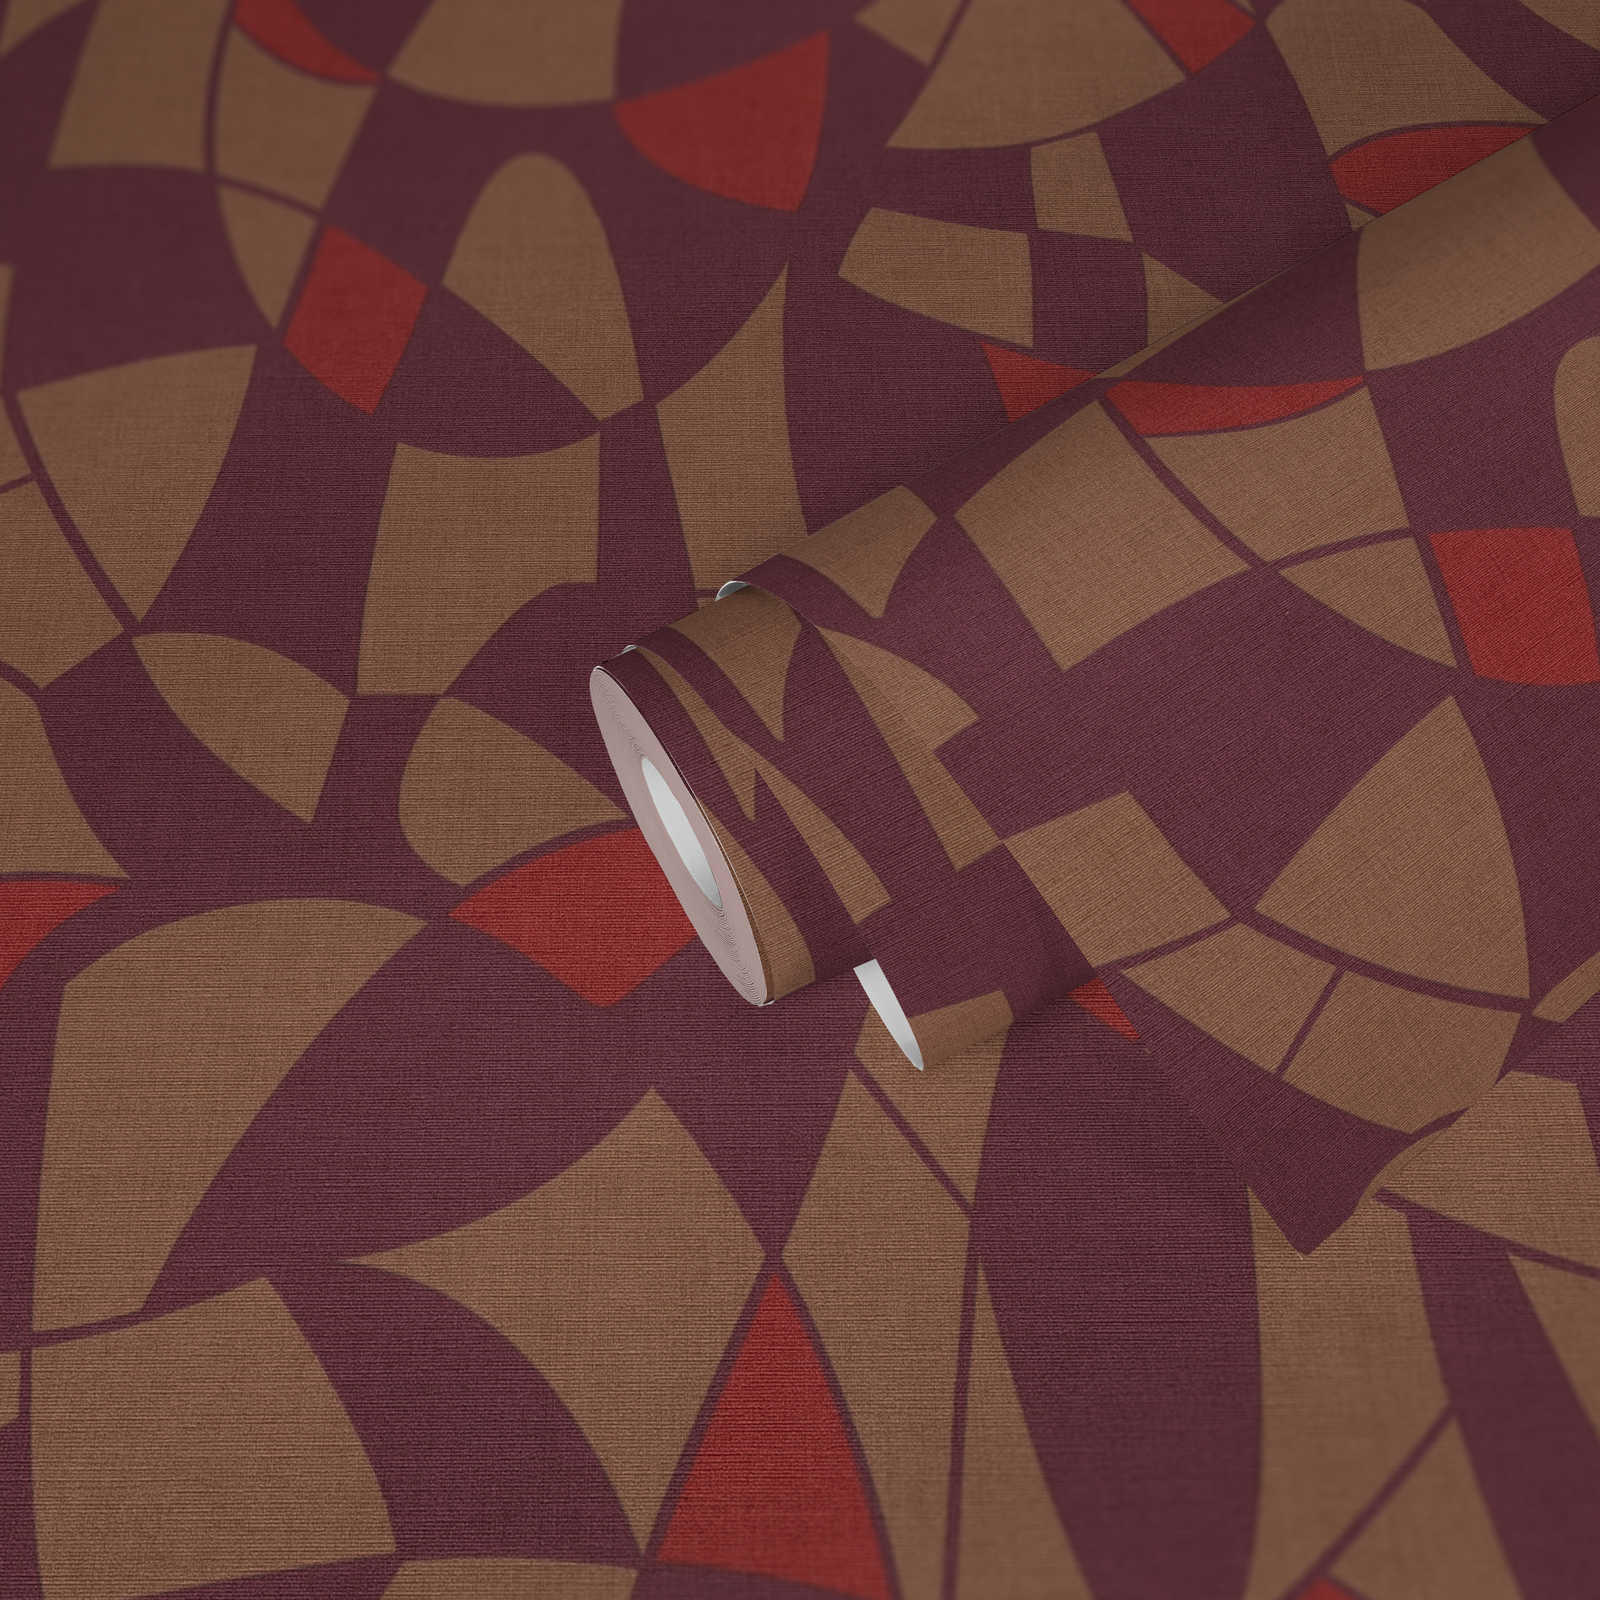             Non-woven wallpaper in dark colours in an abstract pattern - purple, brown, red
        